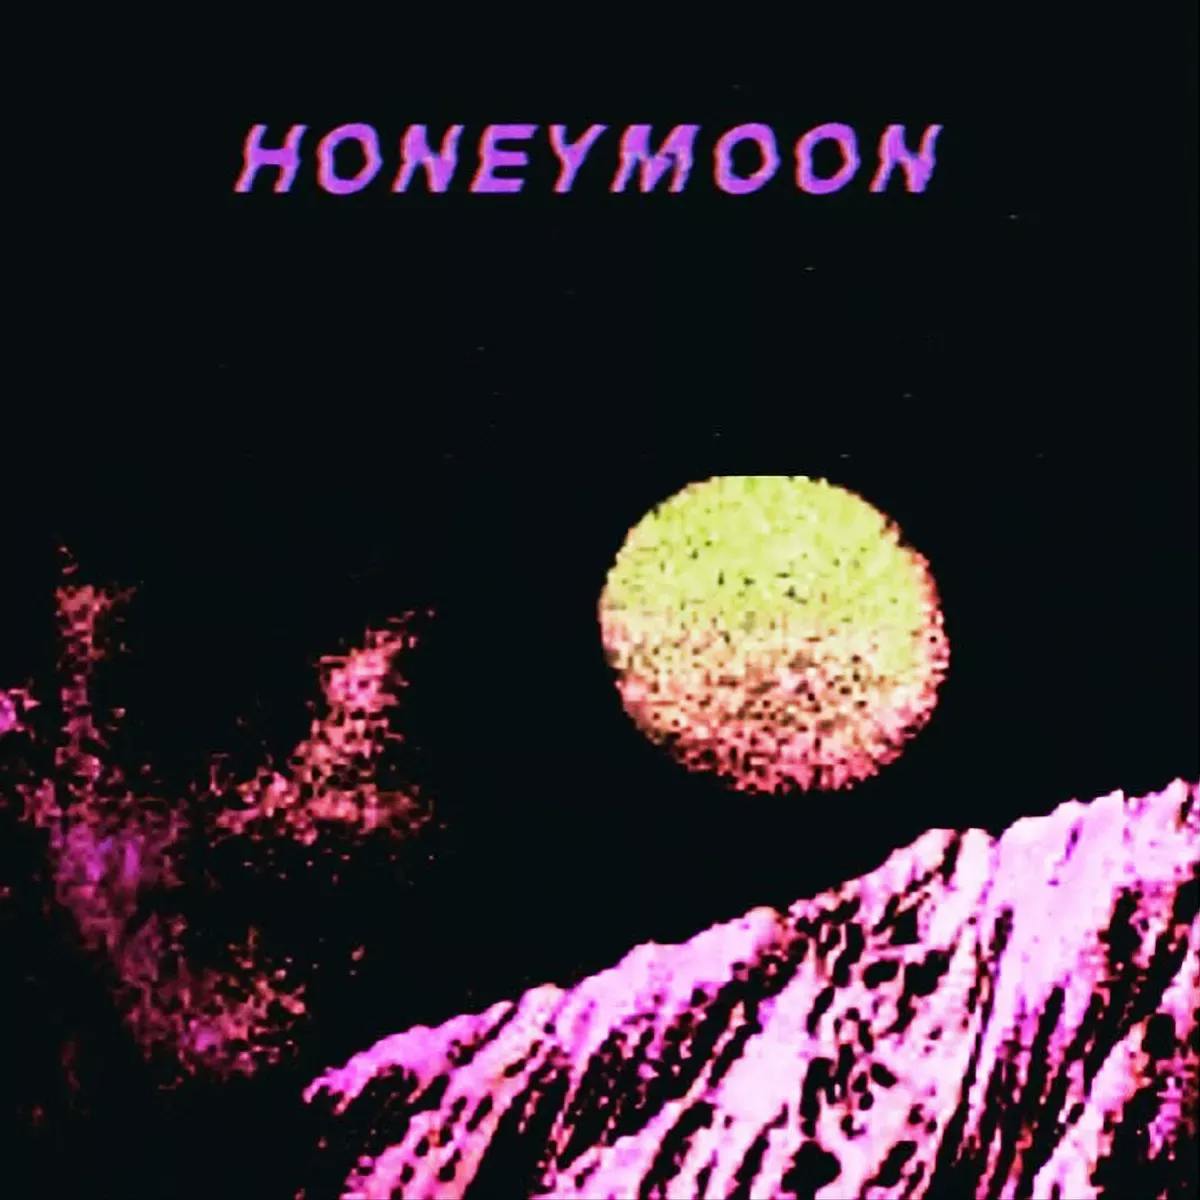 Pixelated background of a moon and mountain with the text "Honeymoon"